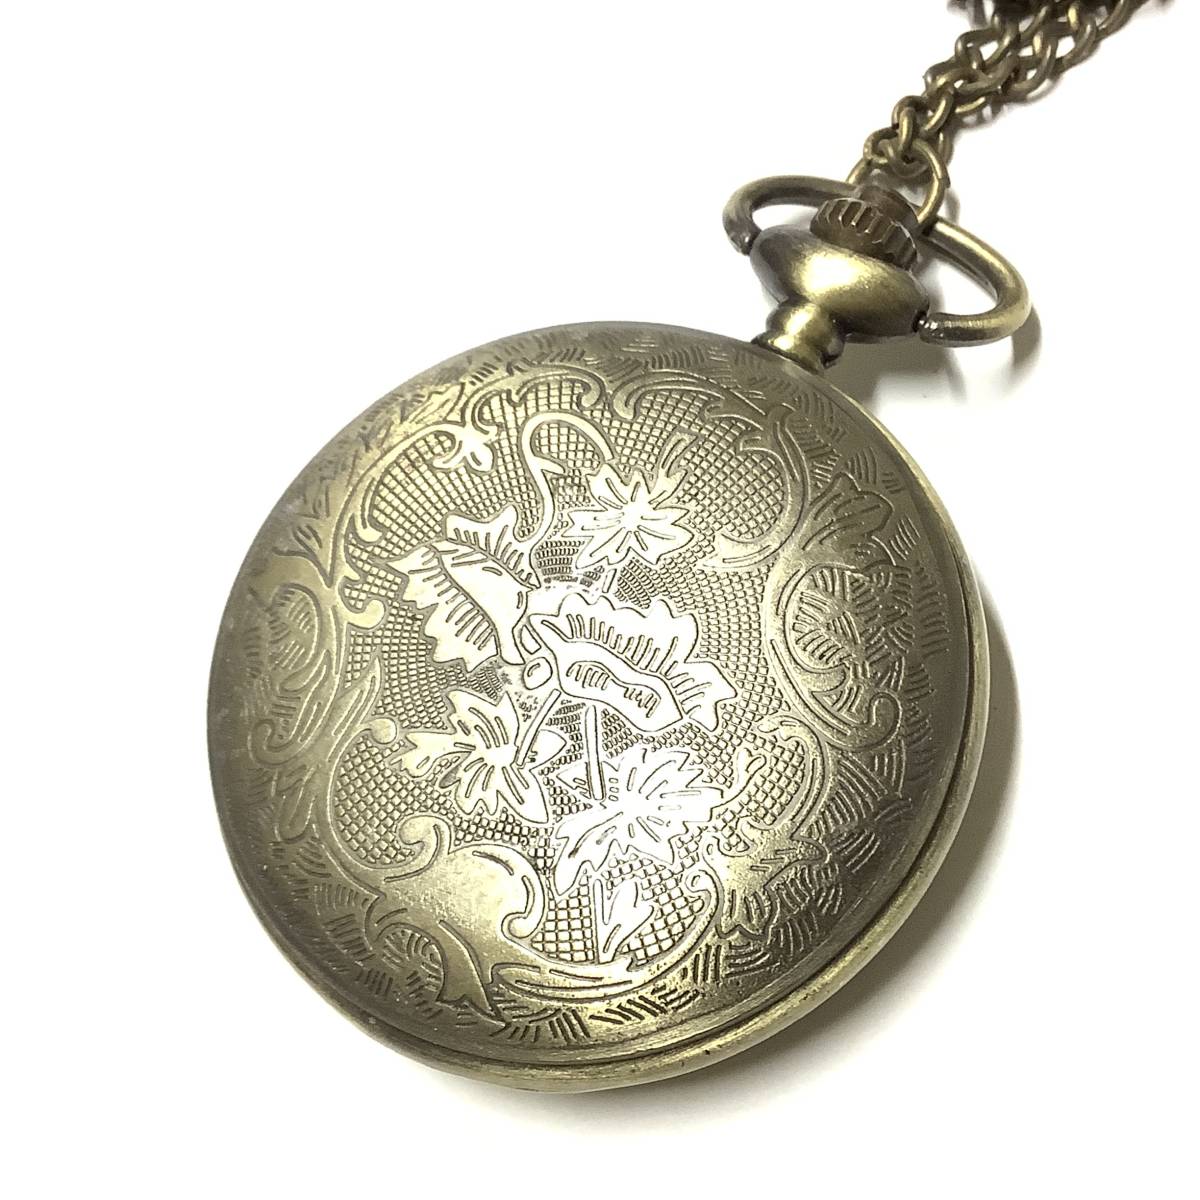 [ used, battery replaced ] mystery. country. Alice clock ... pocket watch ② retro character watch necklace white ...